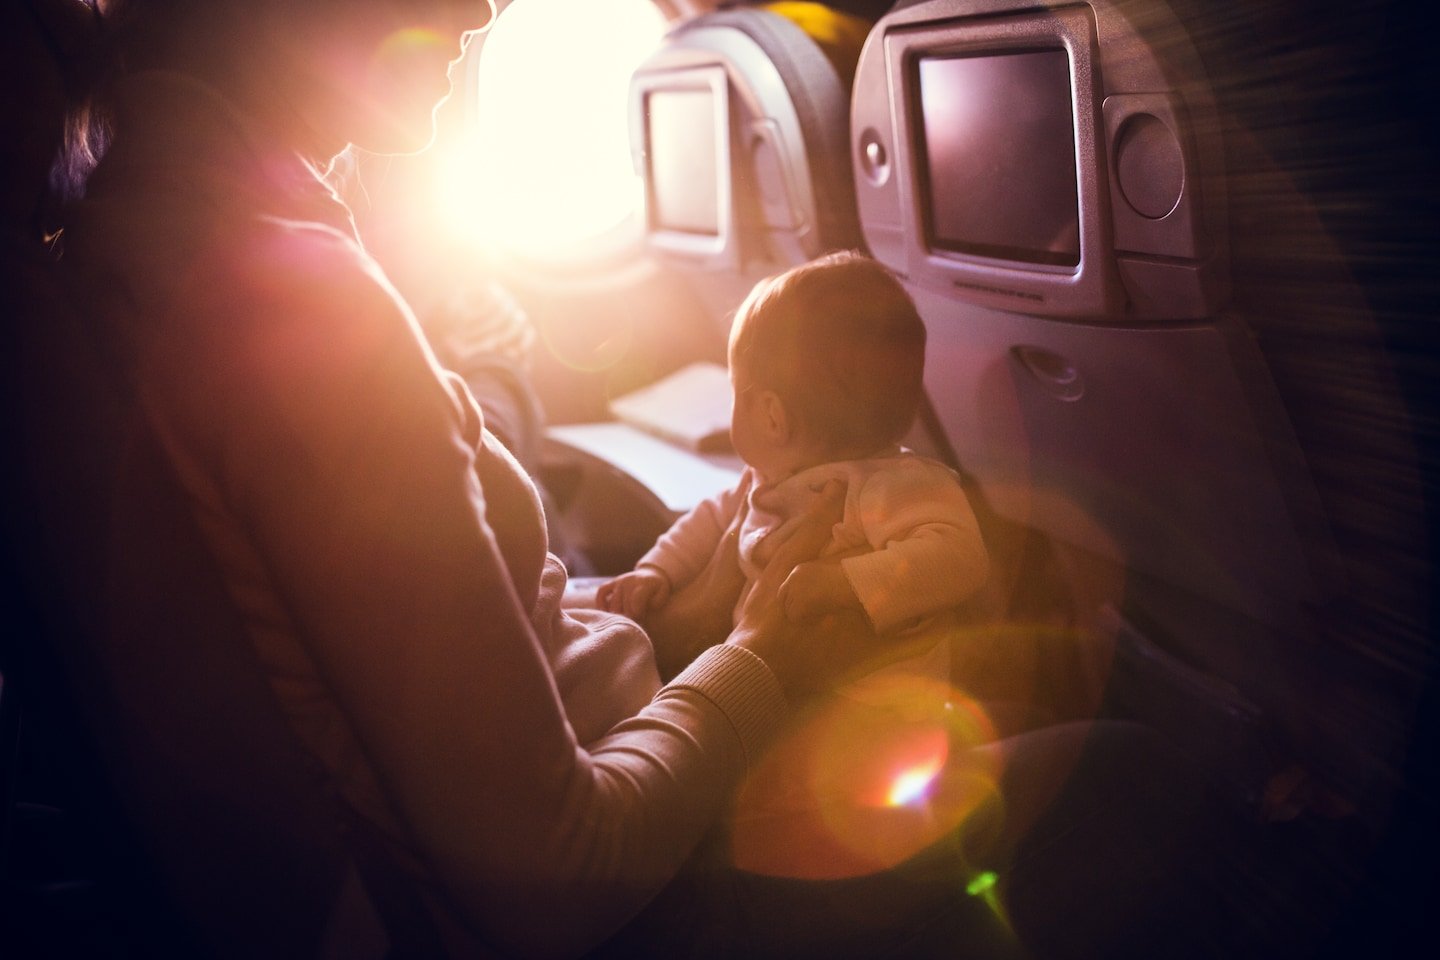 Traveling with kids? Here’s how to rethink your flights.